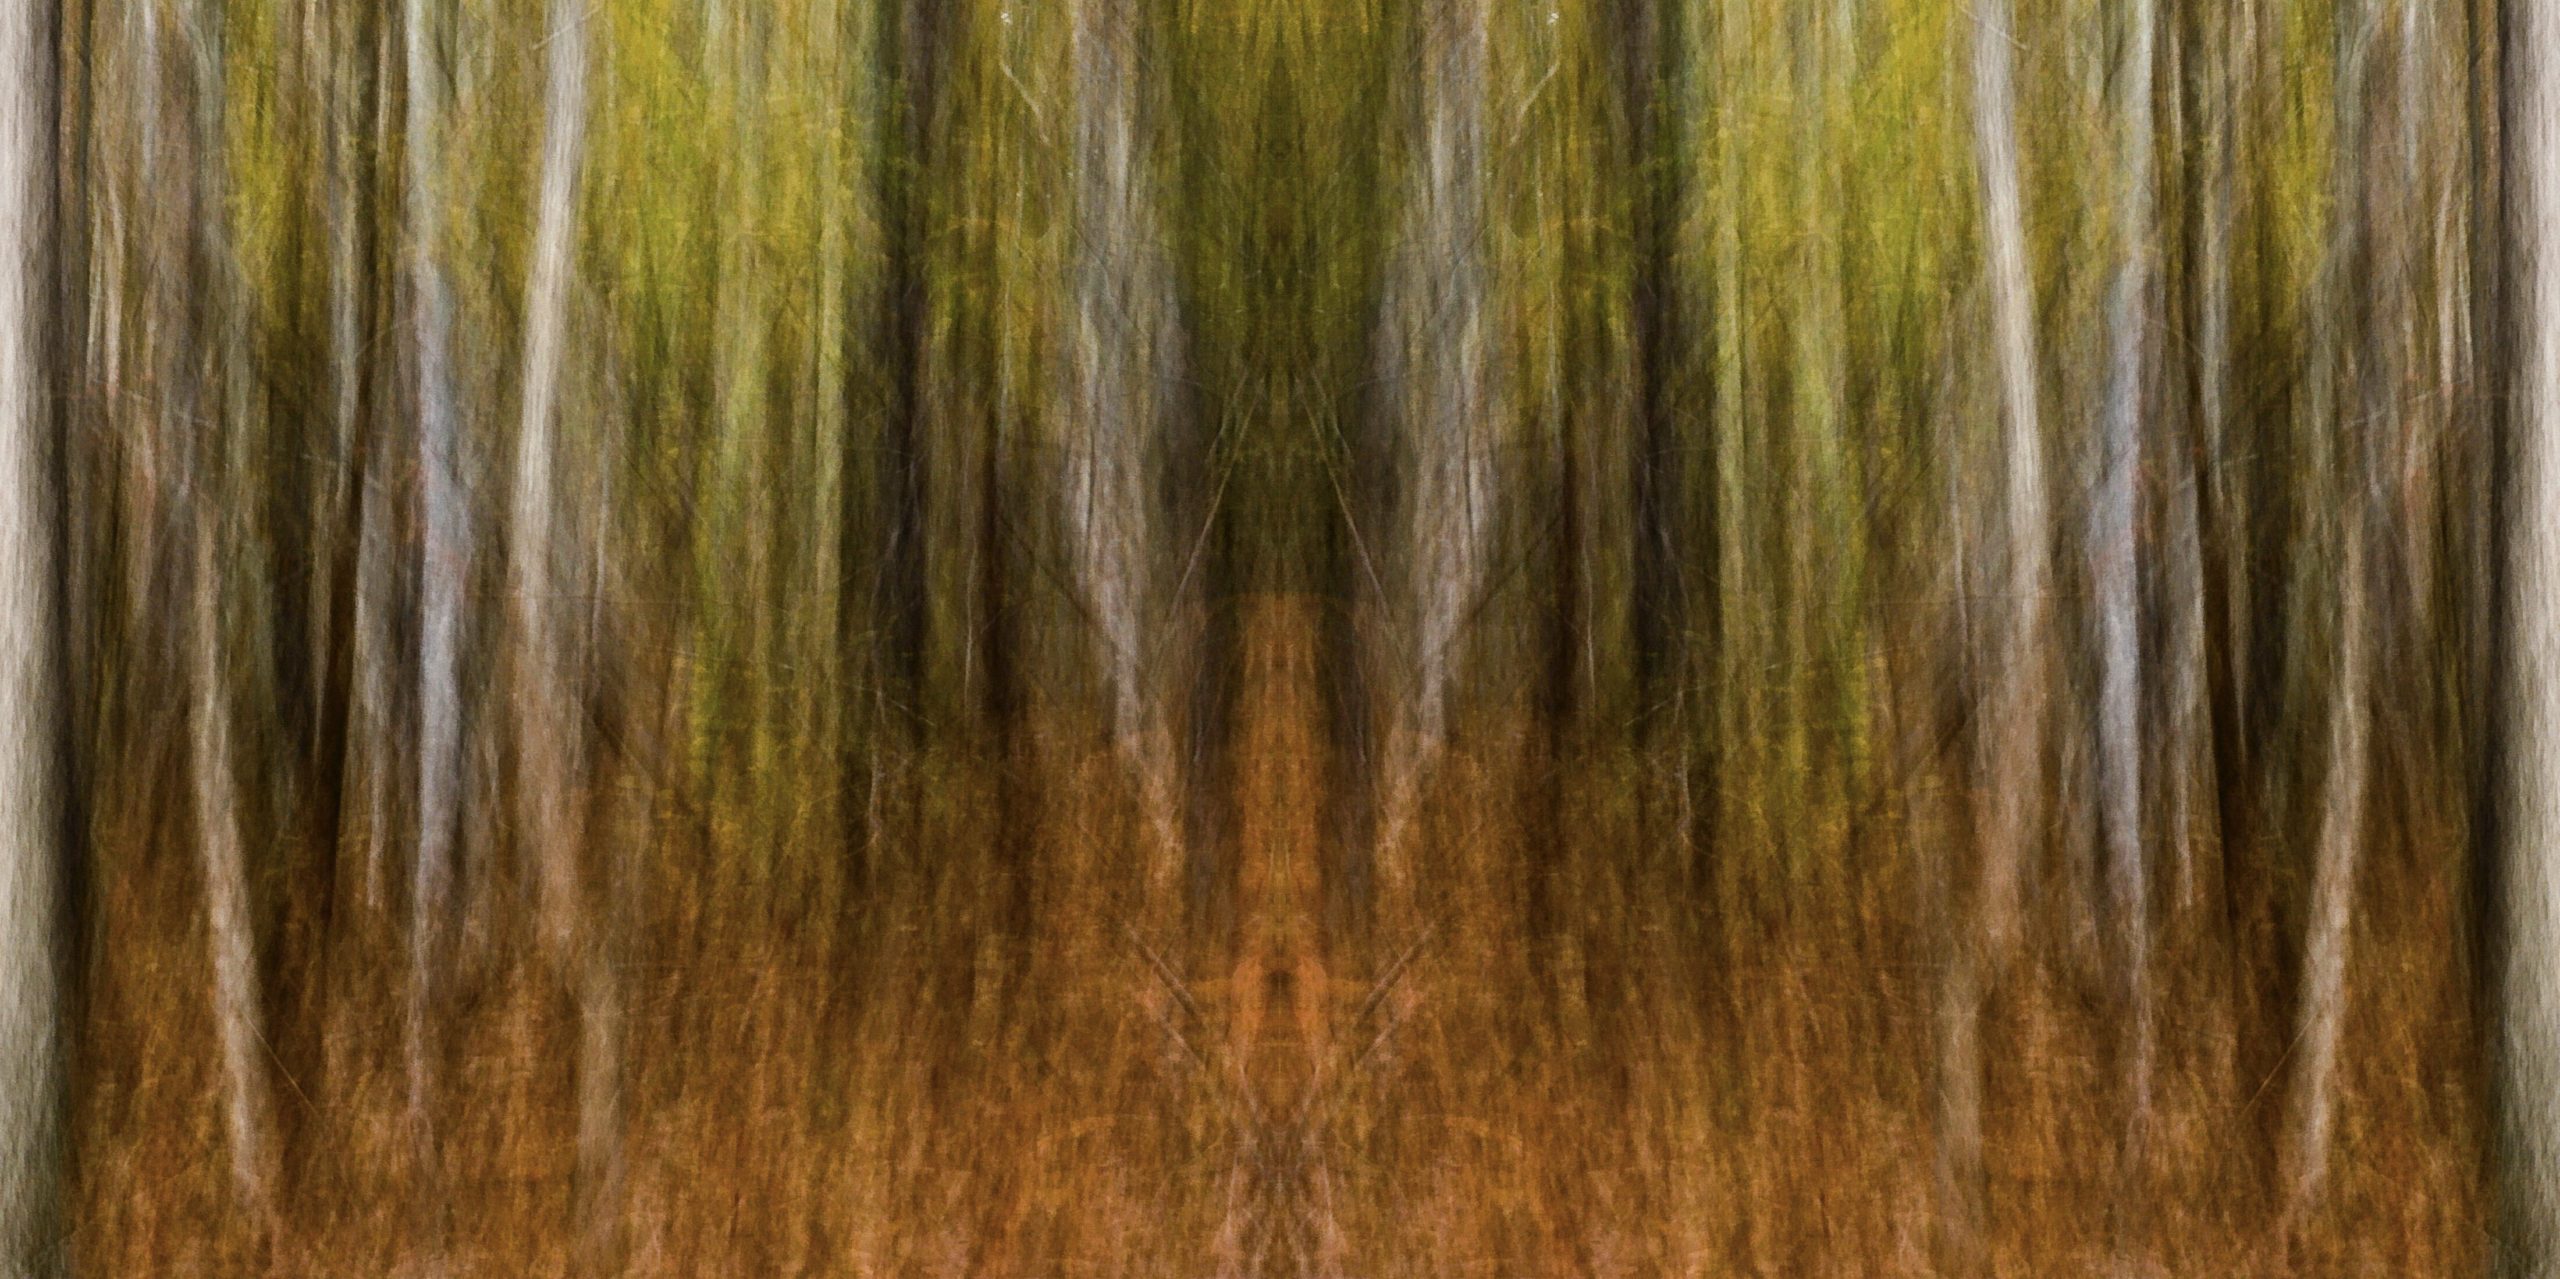 Eno River Forest by Dan Gottlieb, ink jet print and acrylic on plexiglass, 30×54.PR at Craven Allen Gallery